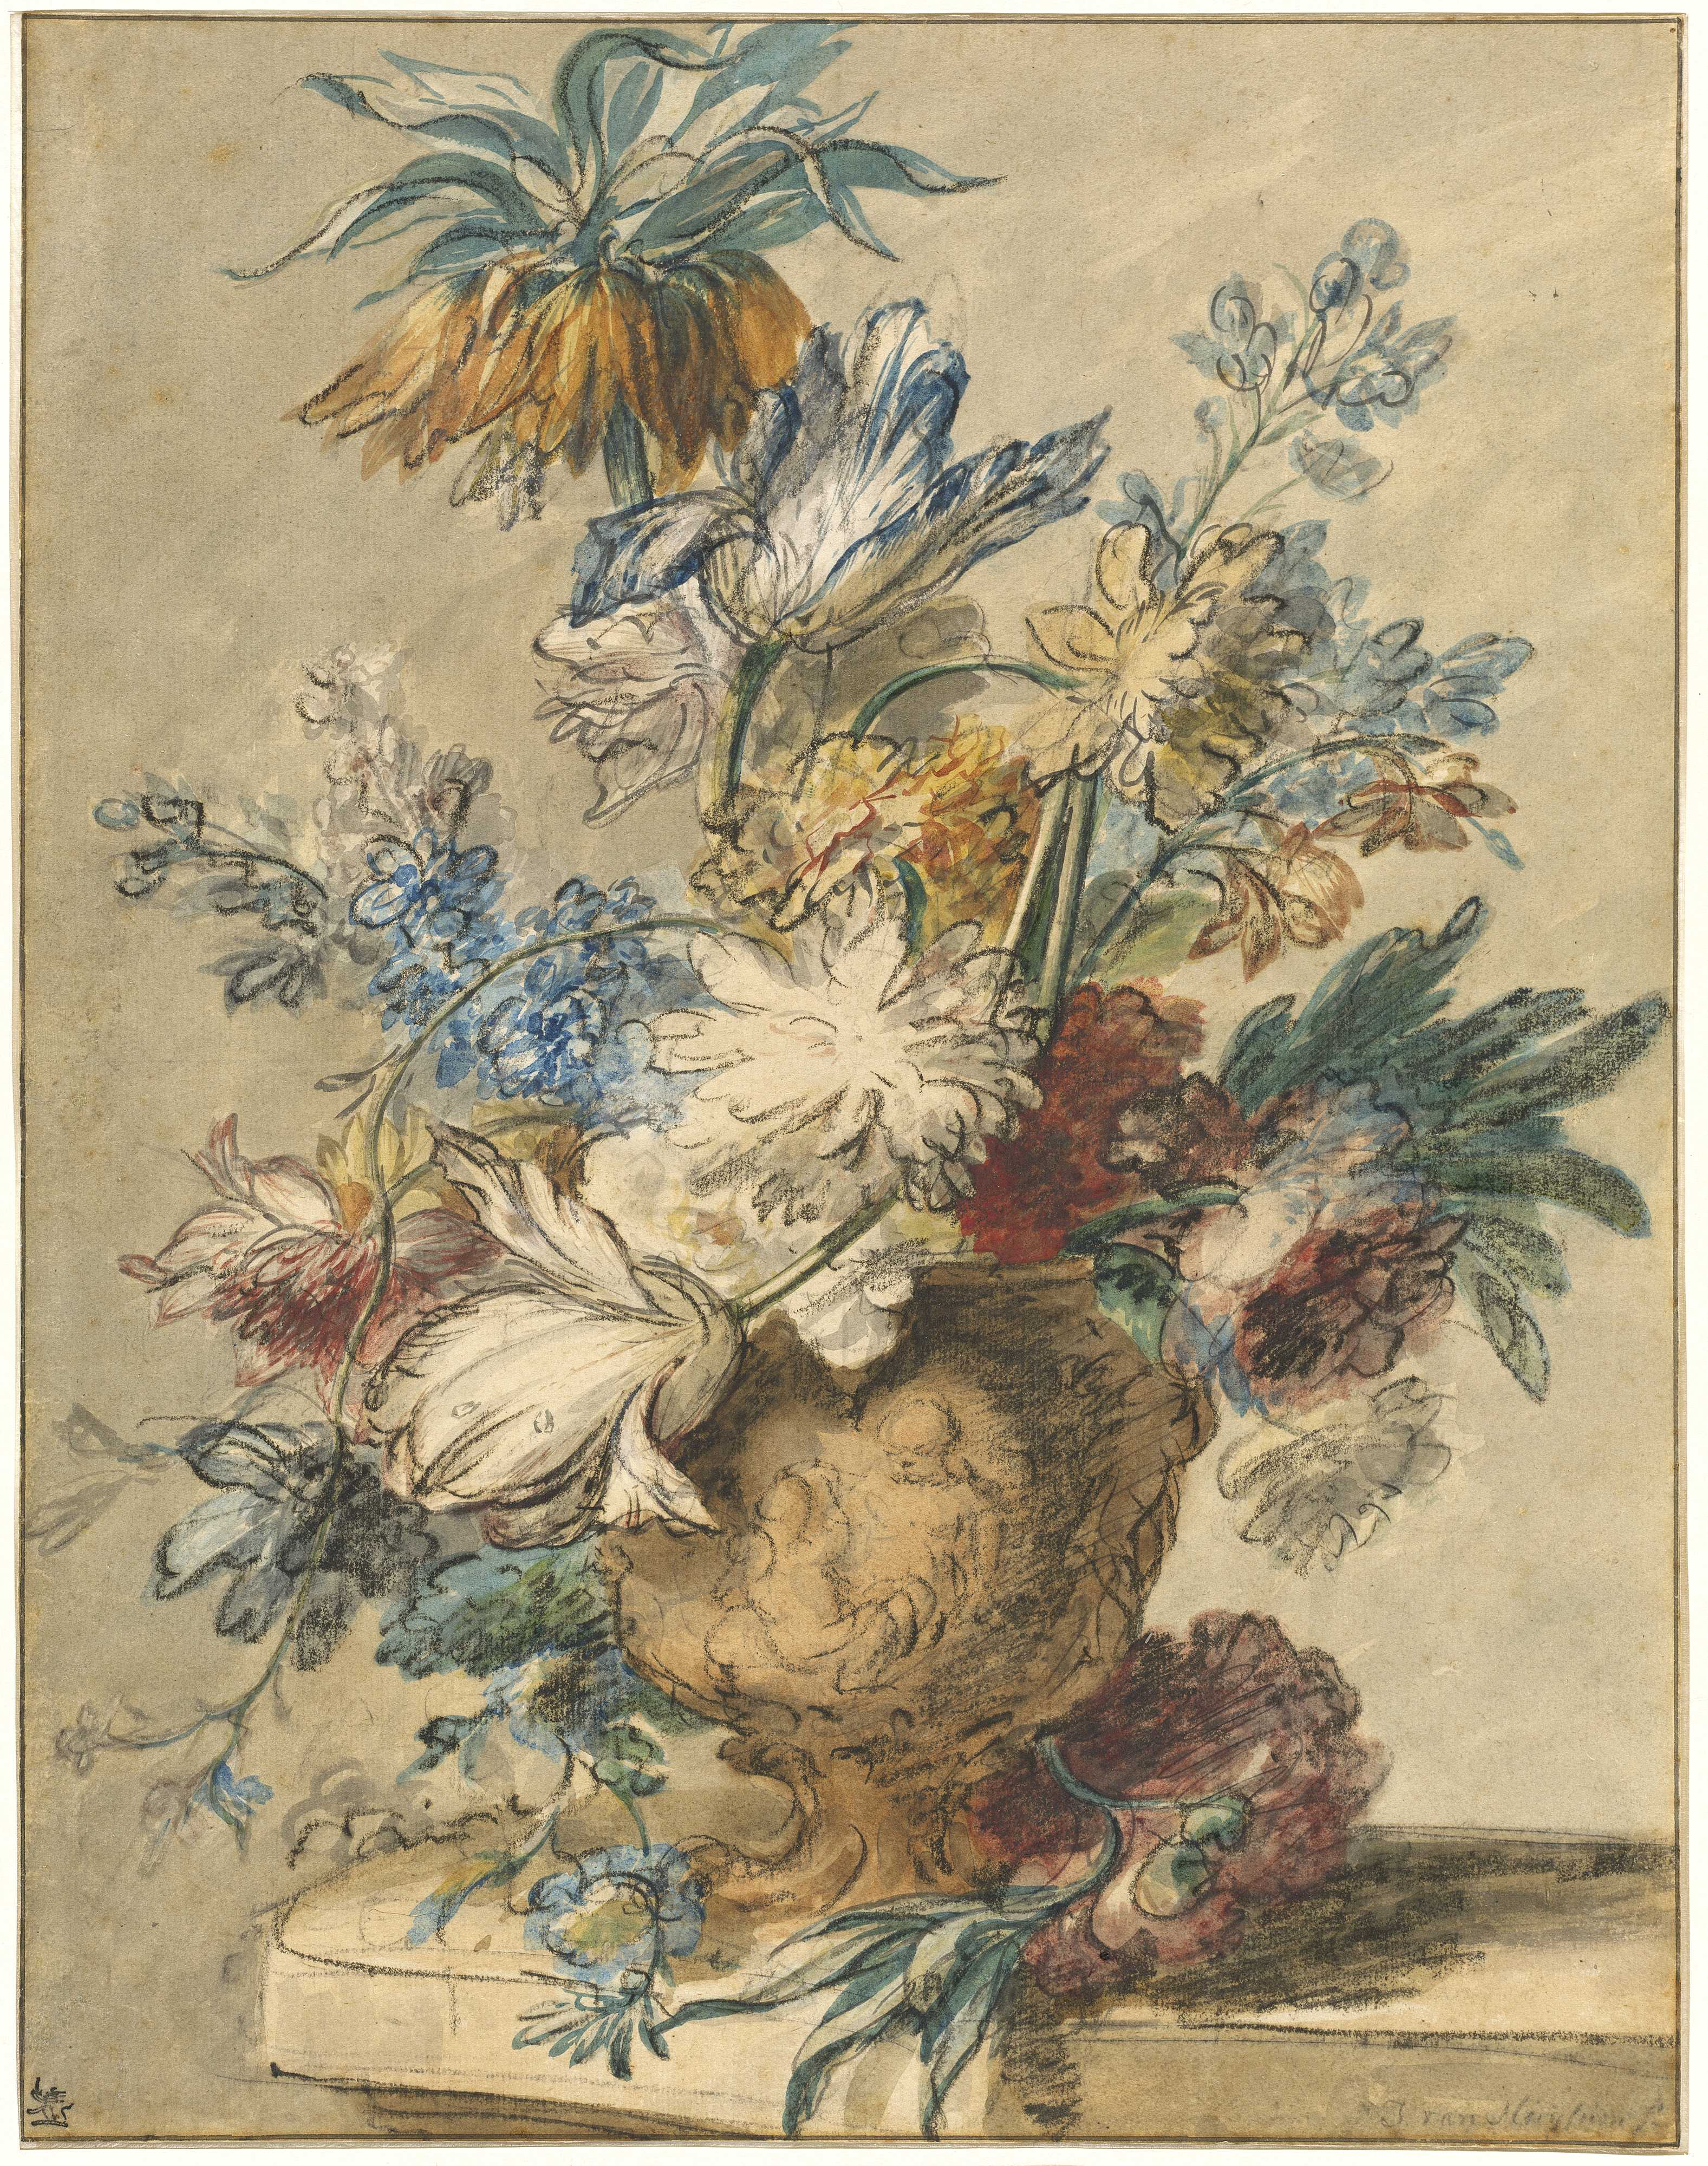 Find out more about Jan van Huysum - Bouquet of Spring Flowers in a Terracotta Vase